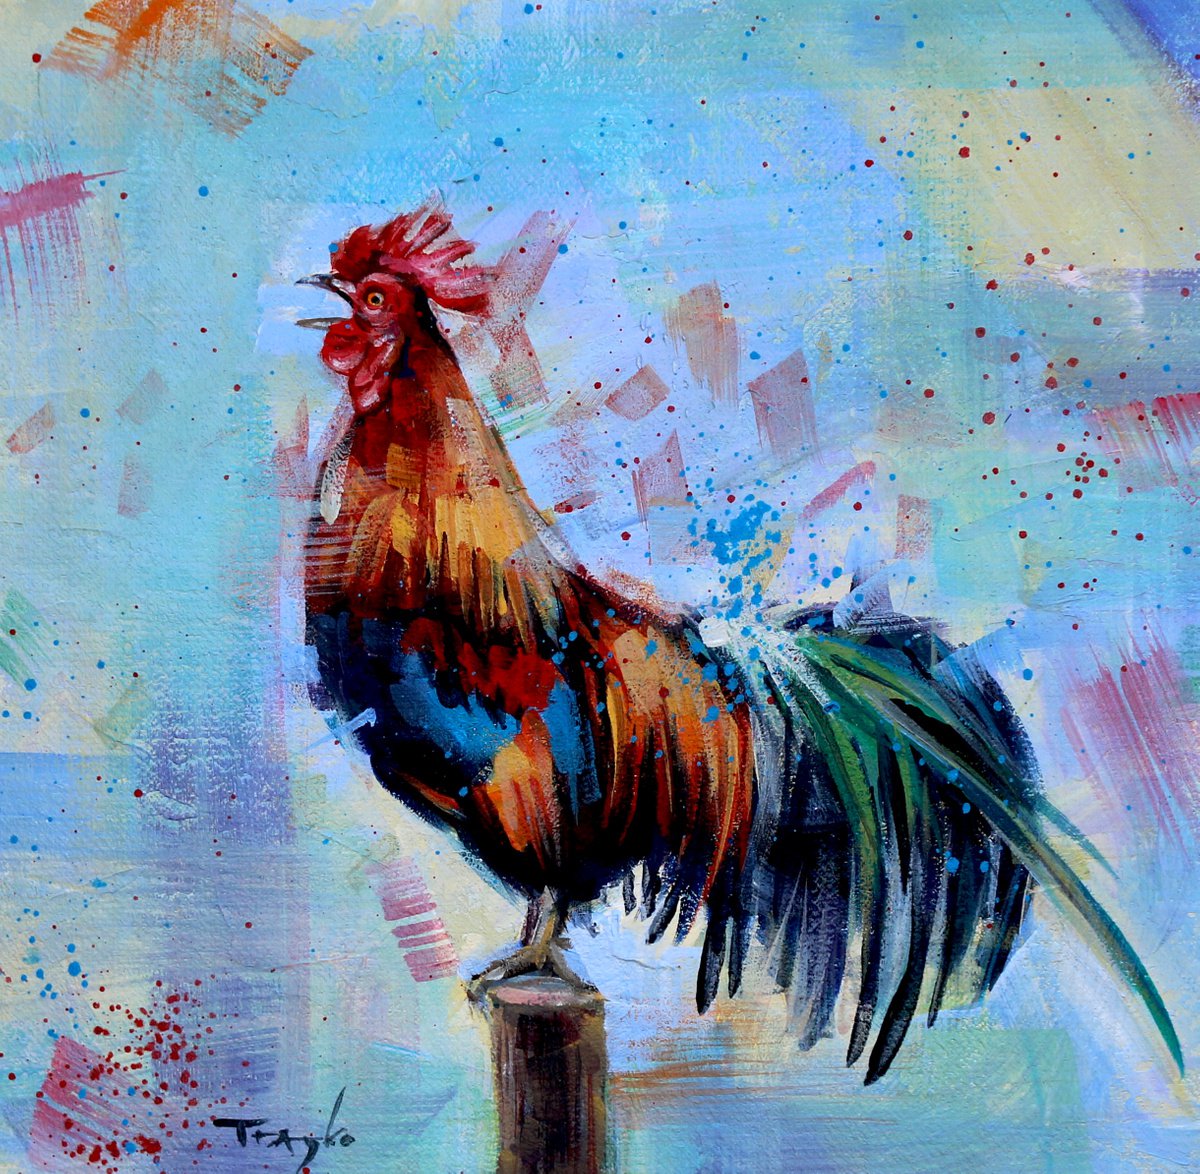 Rooster crowing | Early morning by Trayko Popov